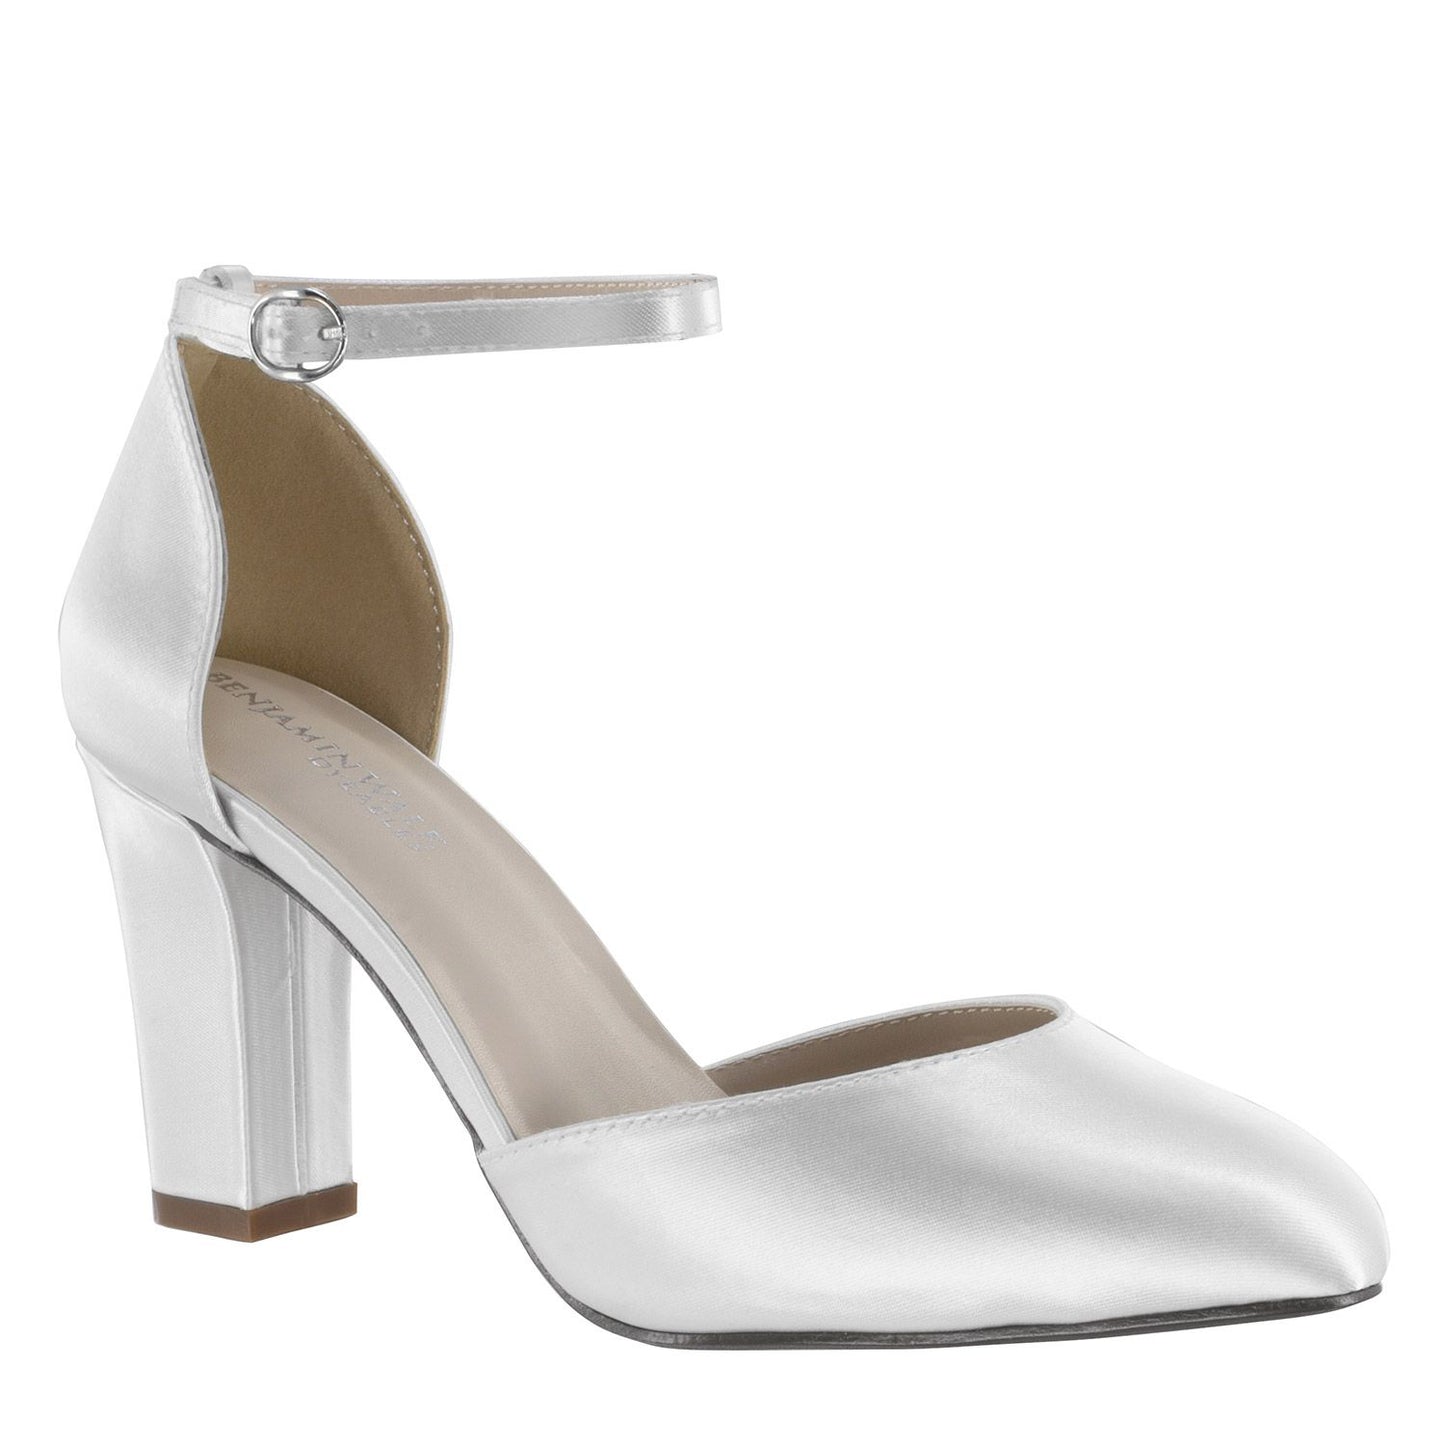 classic closed toe design that features an elegant 2.5 inch heel and adjustable strap.